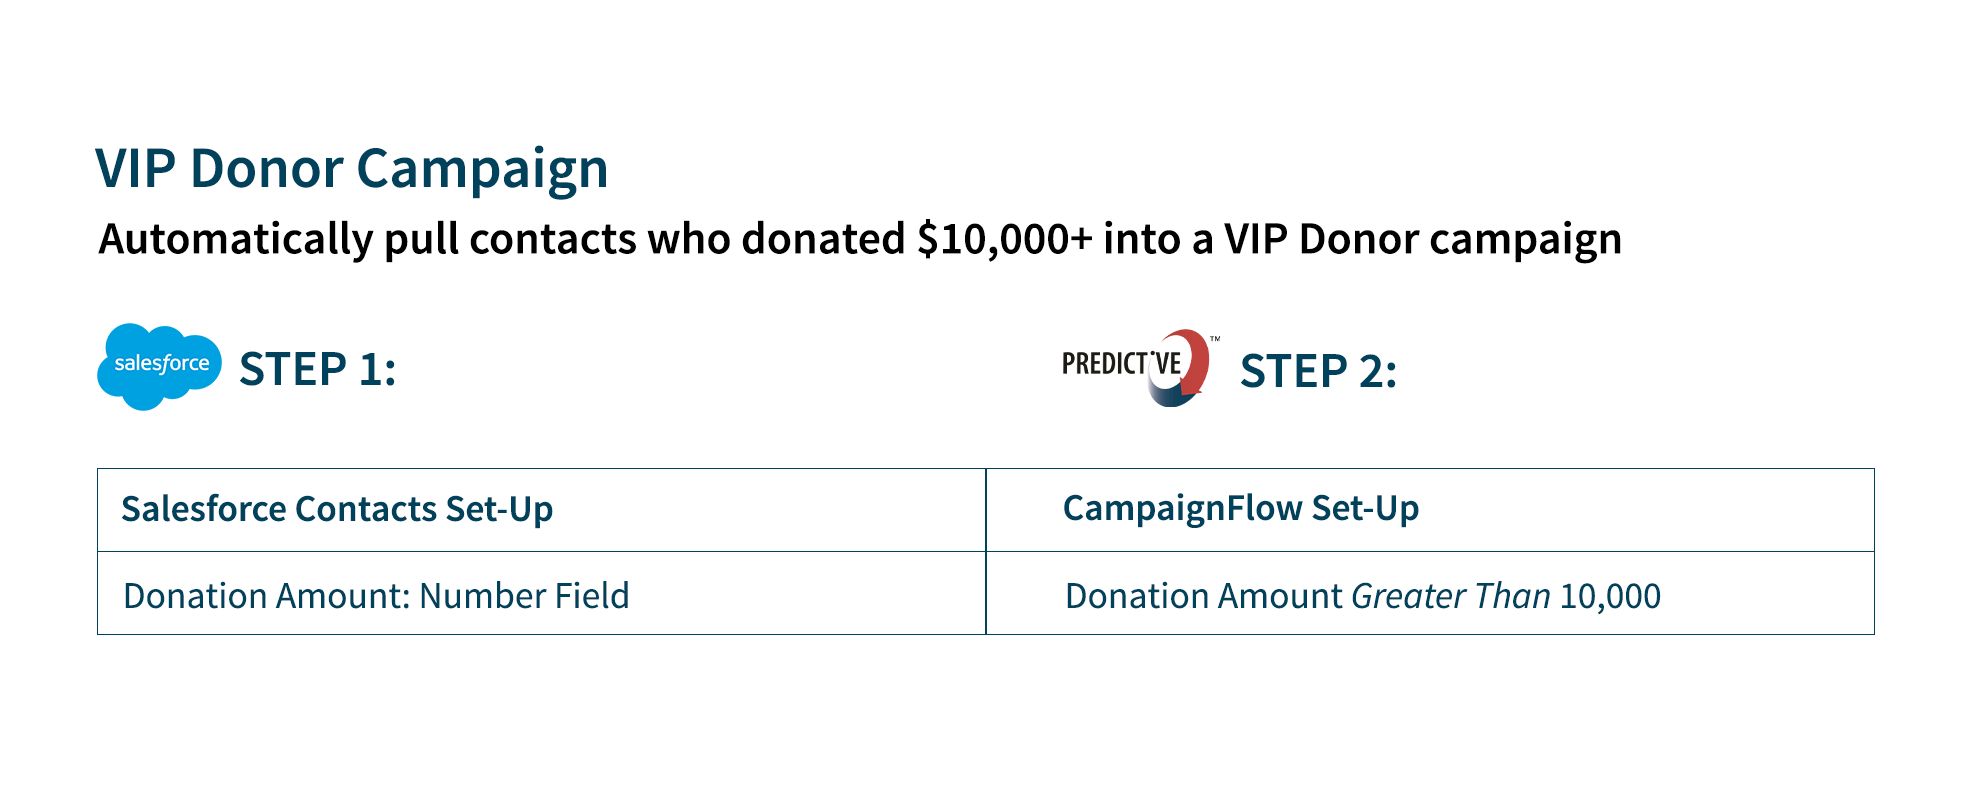 email segmentation based on VIP donors